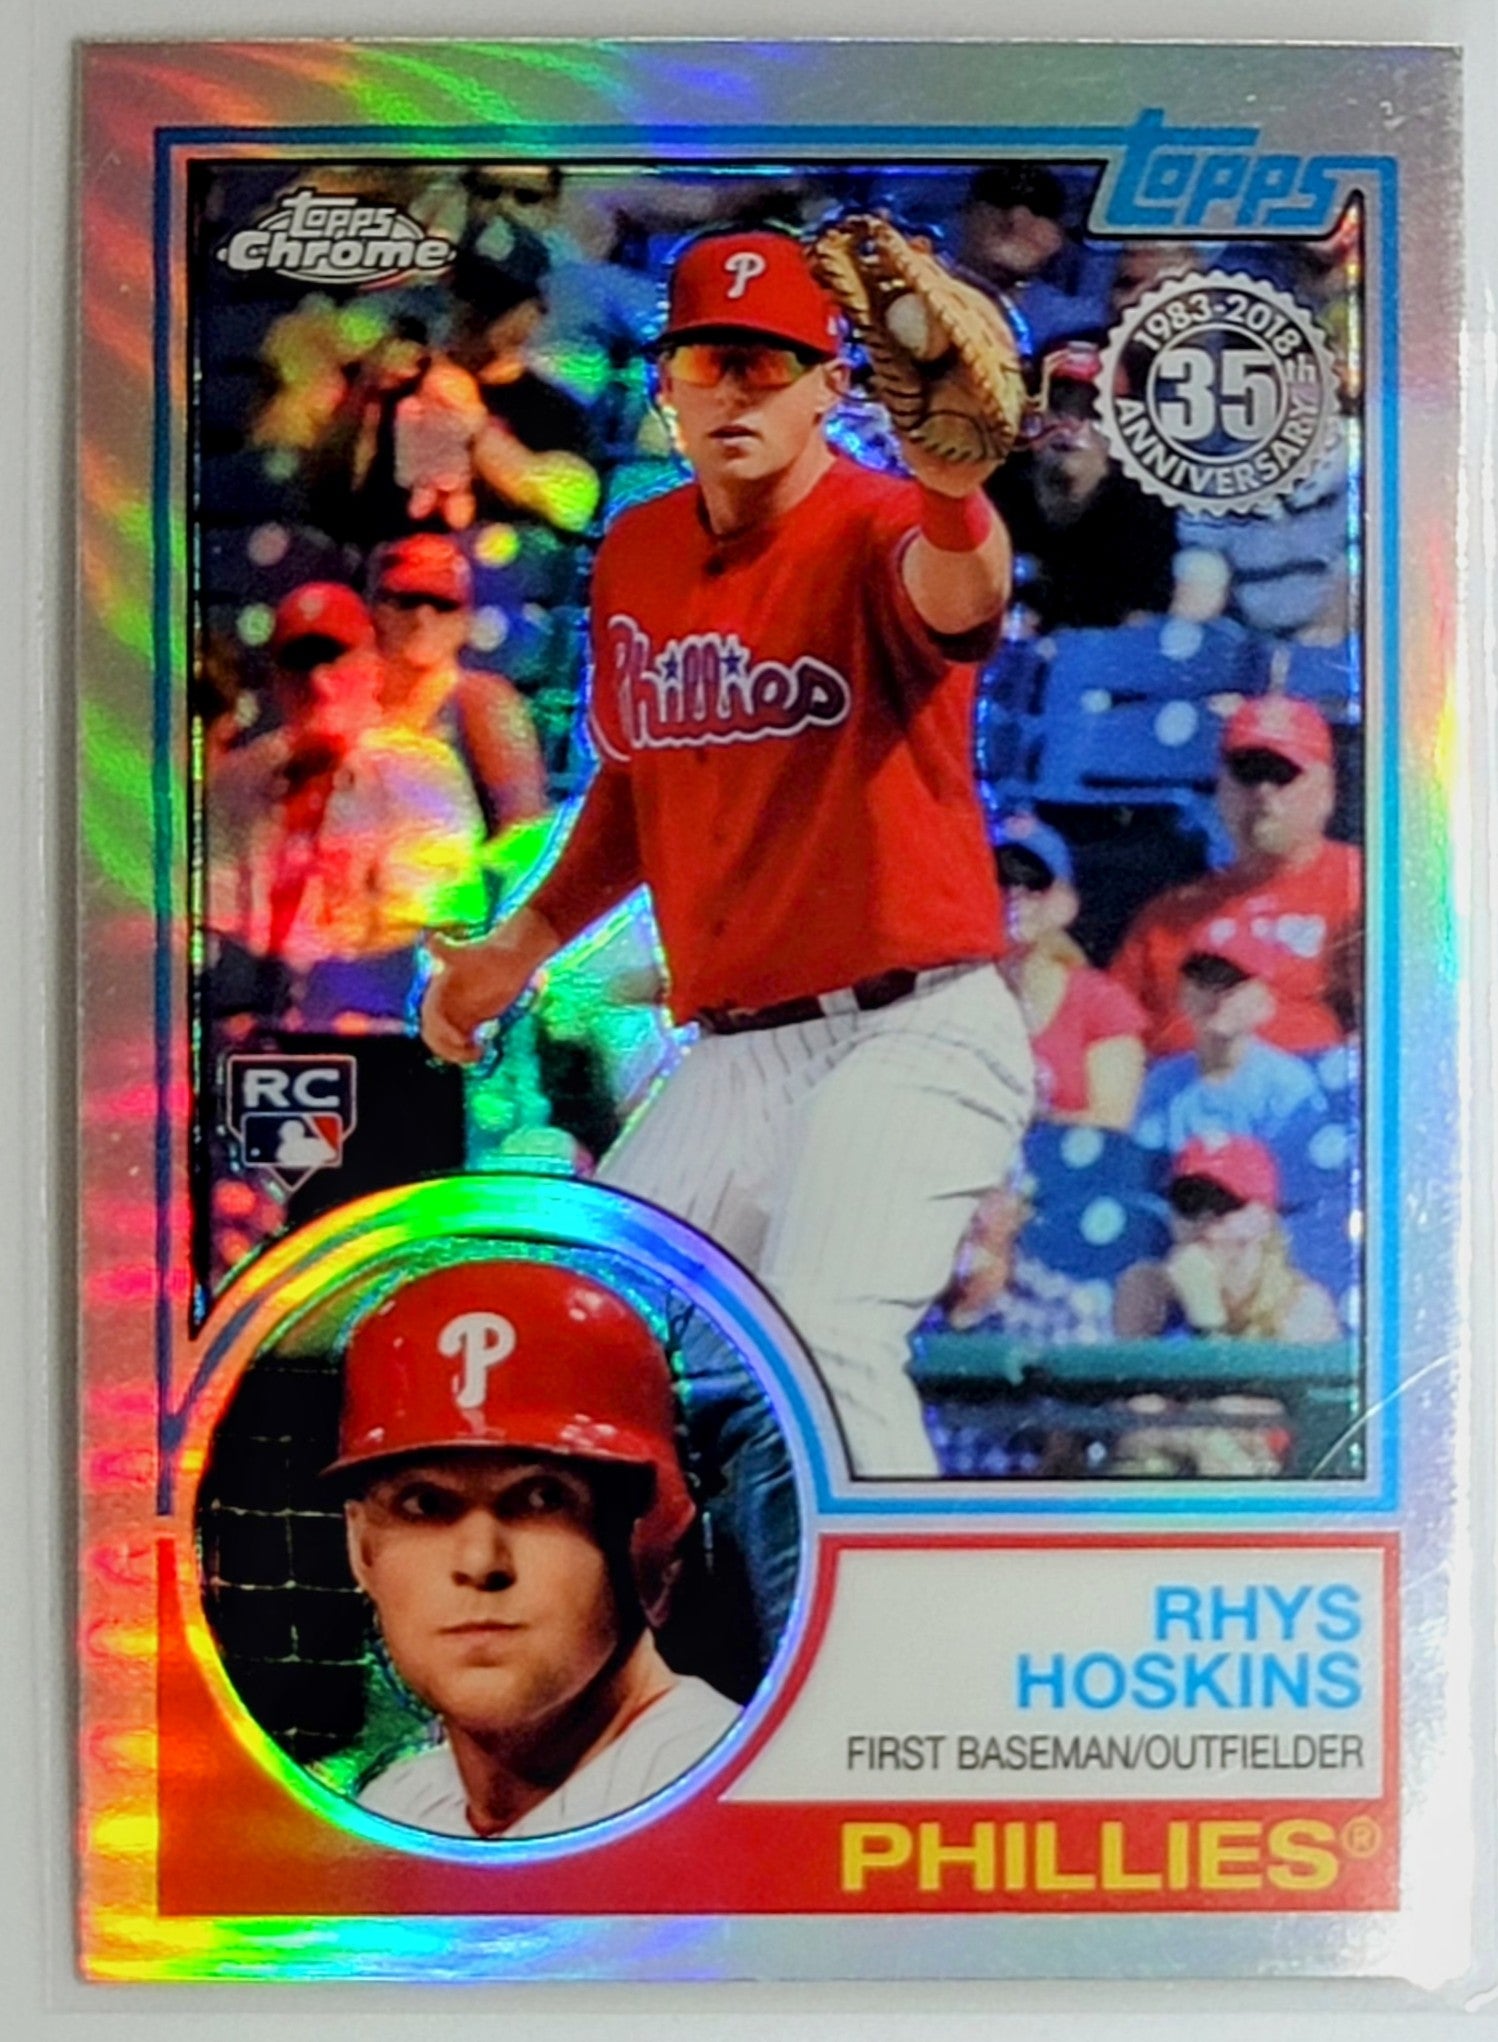 2018 Topps Chrome Rhys Hoskins
  1983 Topps Refractors  Philadelphia
  Phillies Baseball Card TH1C4 simple Xclusive Collectibles   